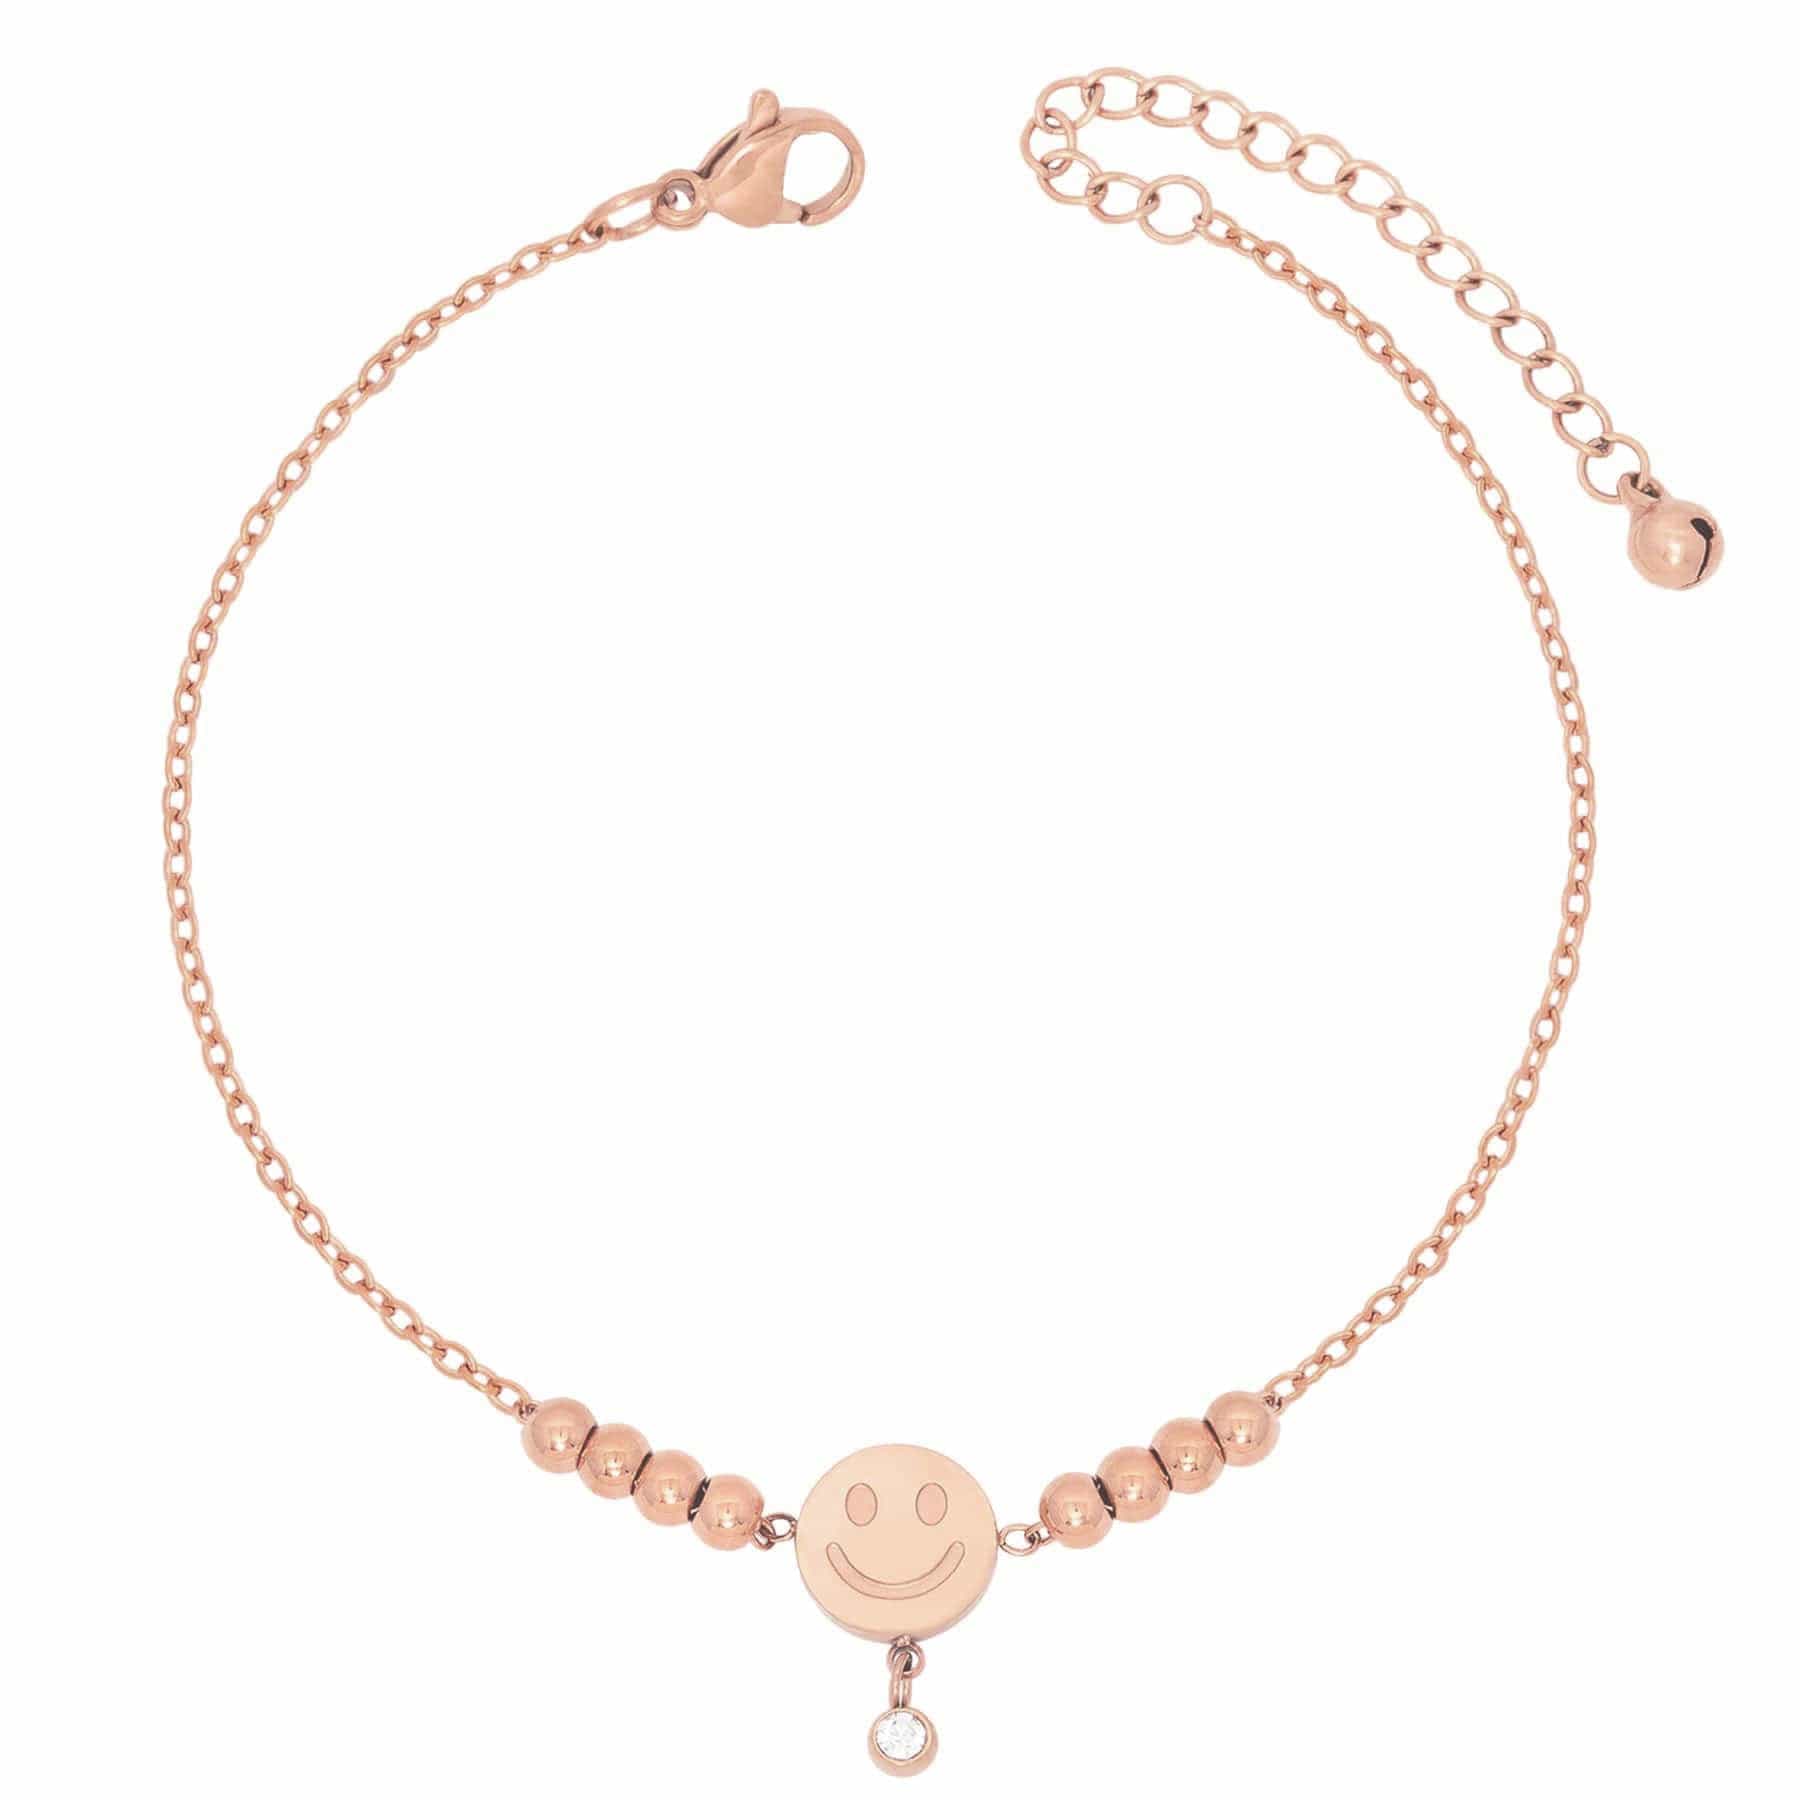 BohoMoon Stainless Steel Smiley Anklet Rose Gold